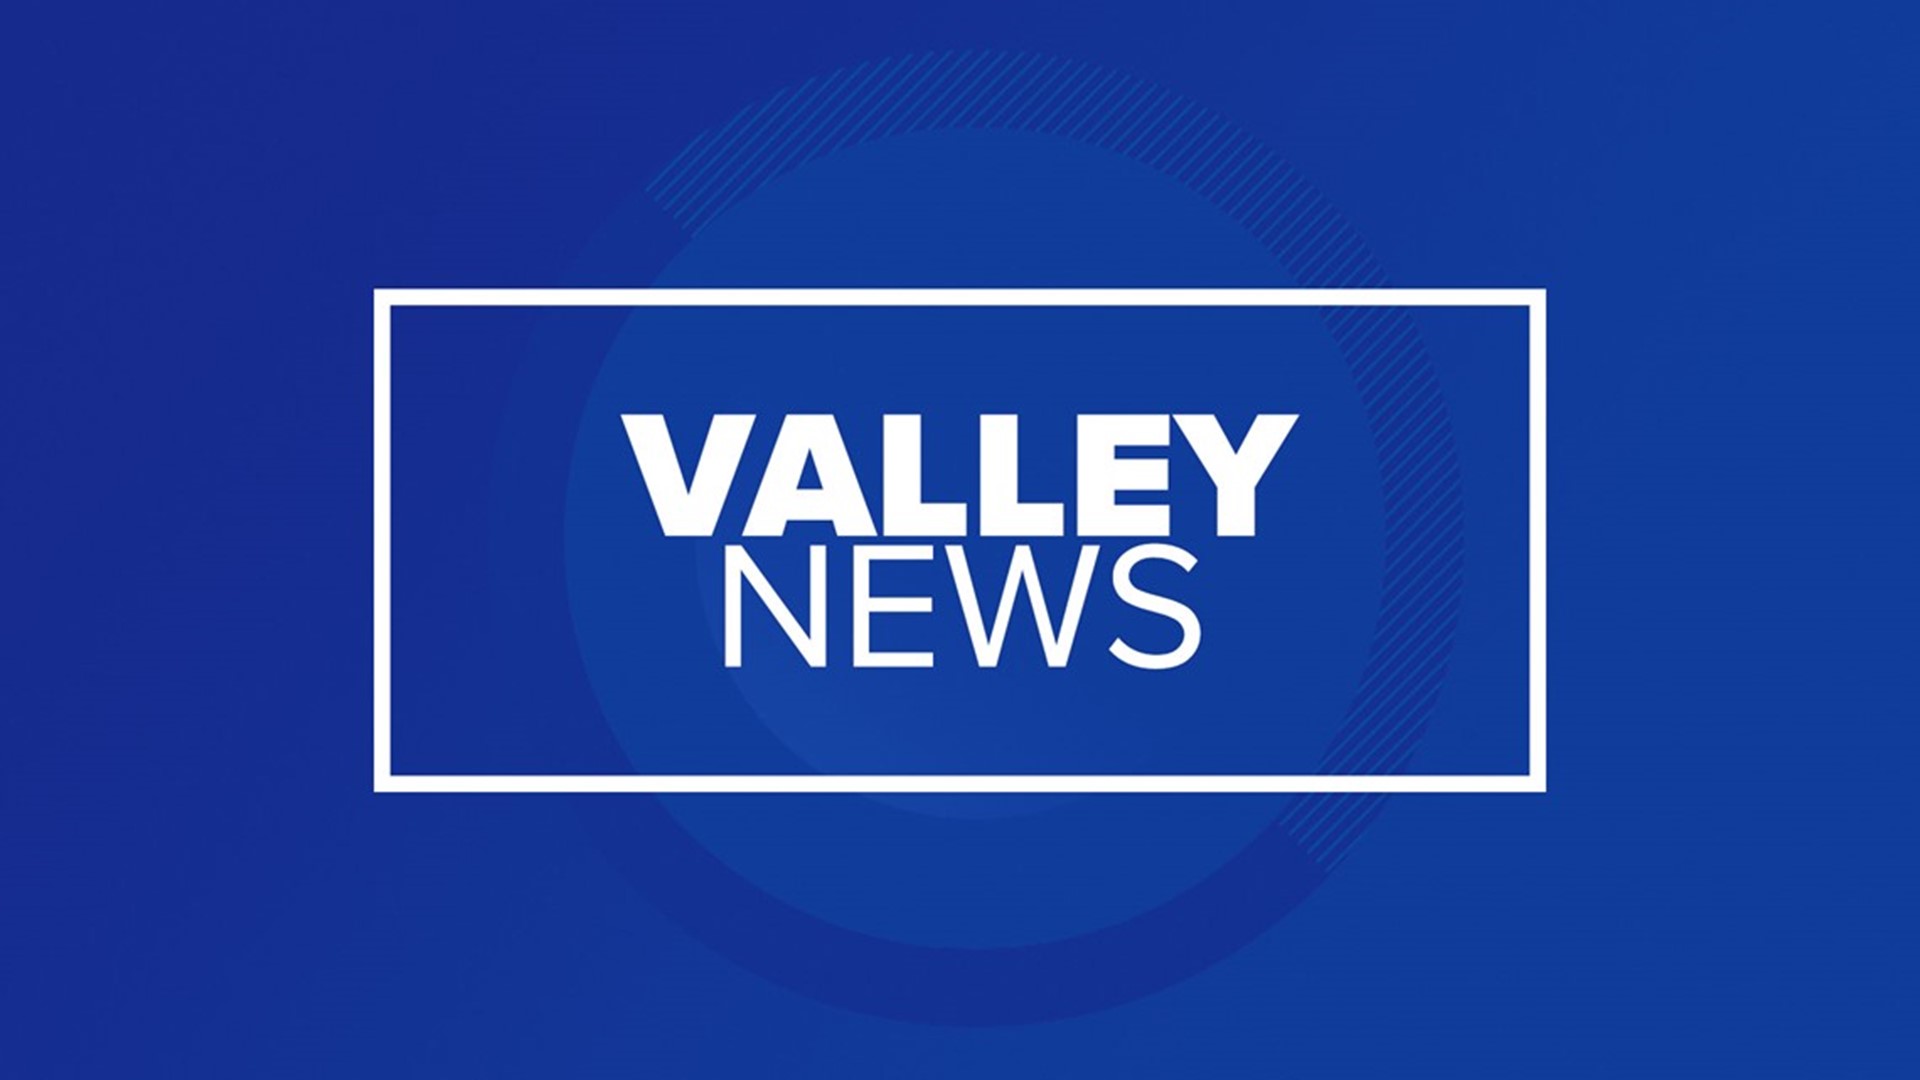 Woman, man found dead in East Valley home | 12news.com